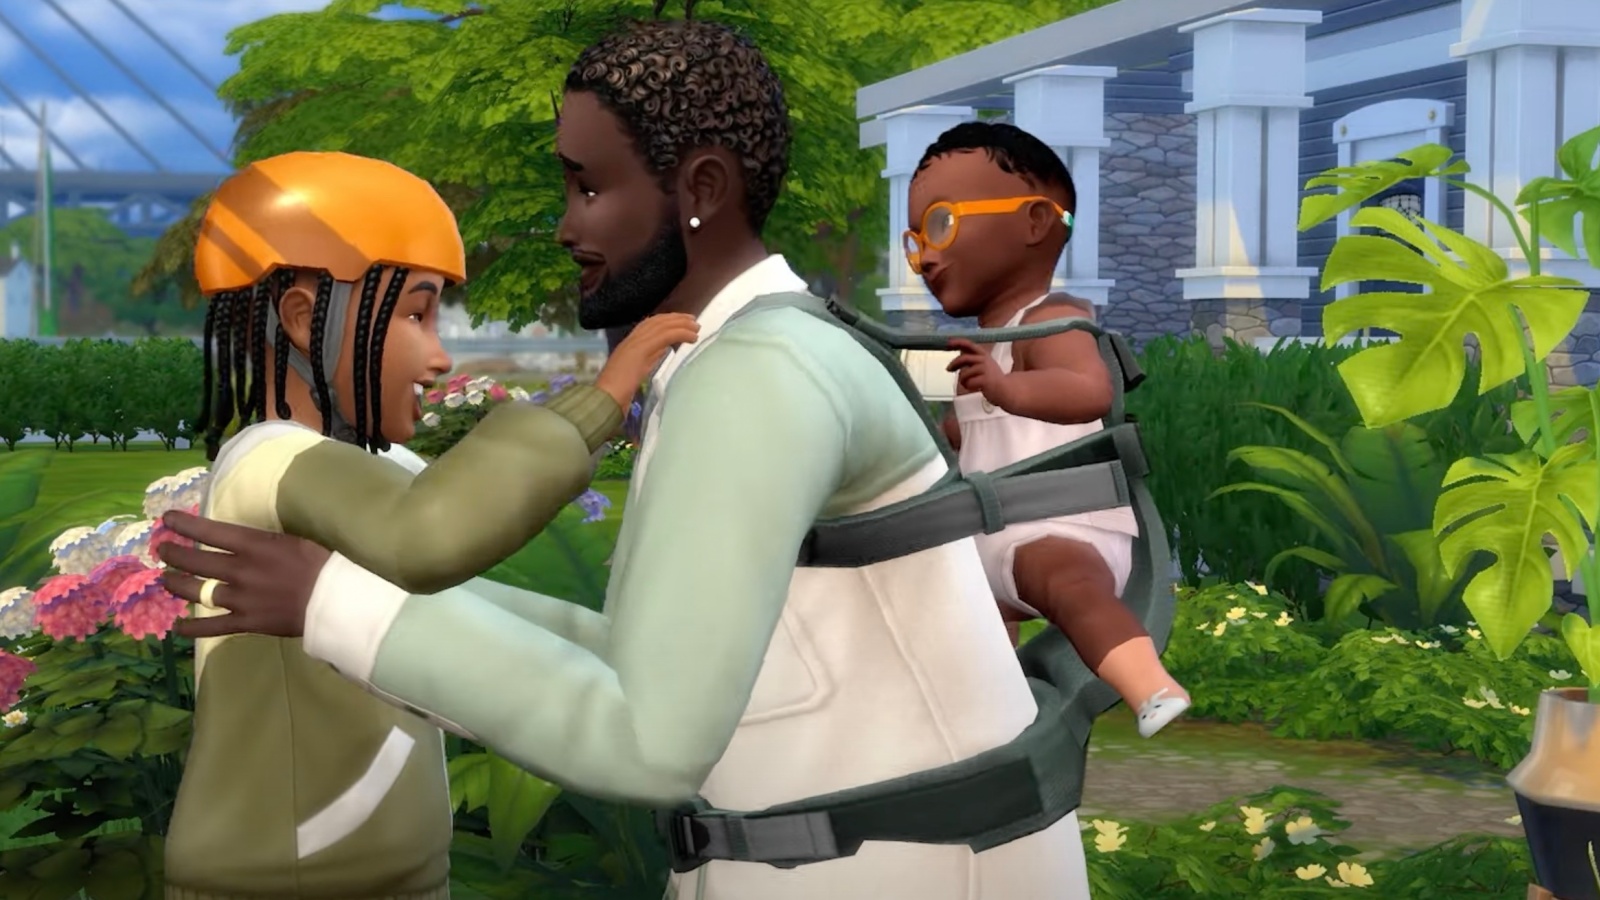 Mods if you don't have Sims 4 Growing Together 